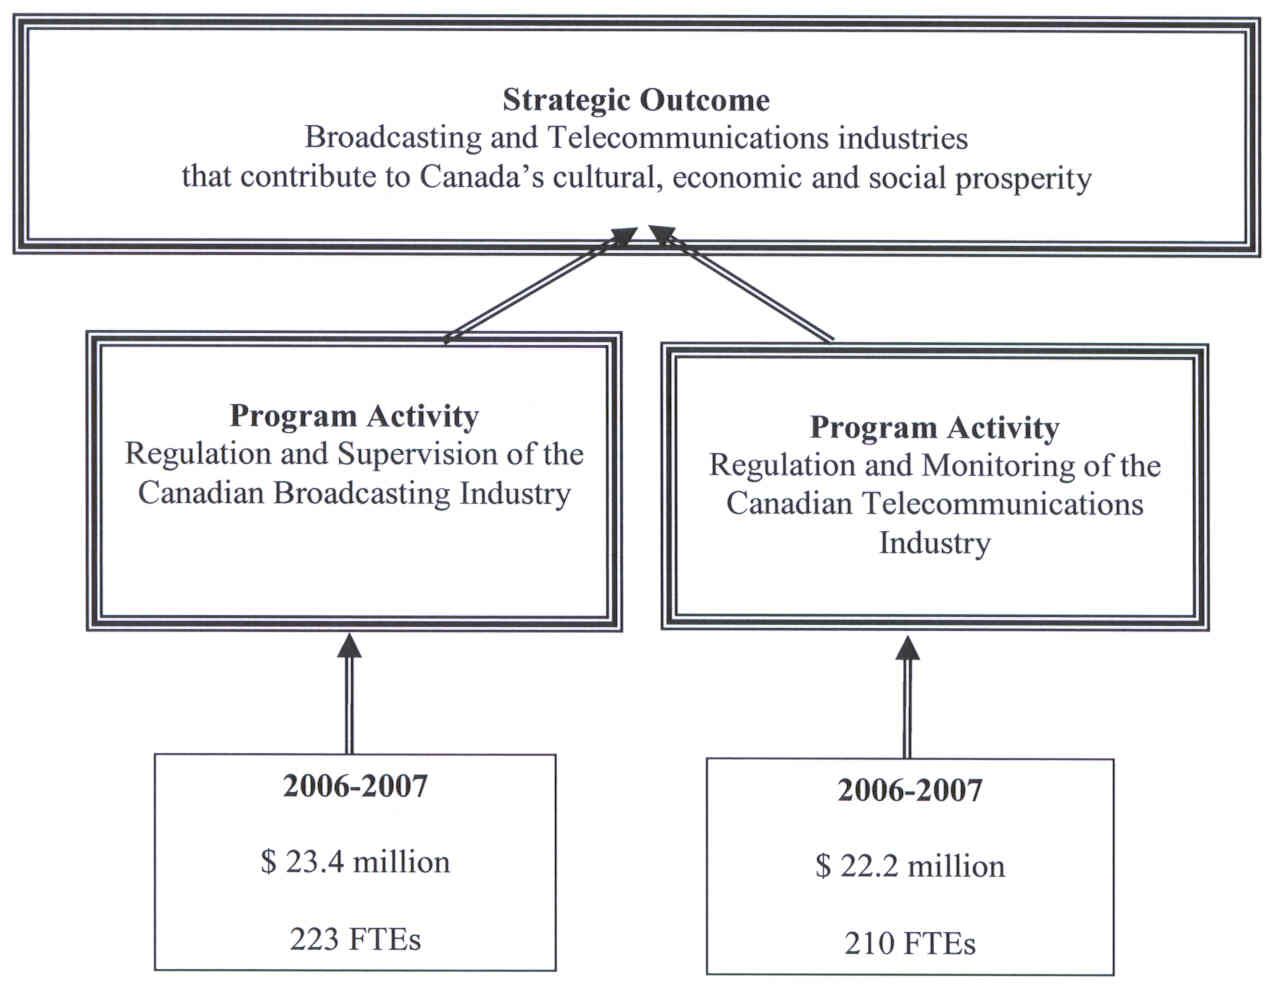 Stragetic Outcome, Broadcasting and Telecommunications industries that contribute to Canada's cultural, economic and social prosperity. Program Activity: Regulation and Supervision of the Canadian Broadcasting Industry. Program Activity Regulation and Monitoring of the Canadian Telecommunications Industry.